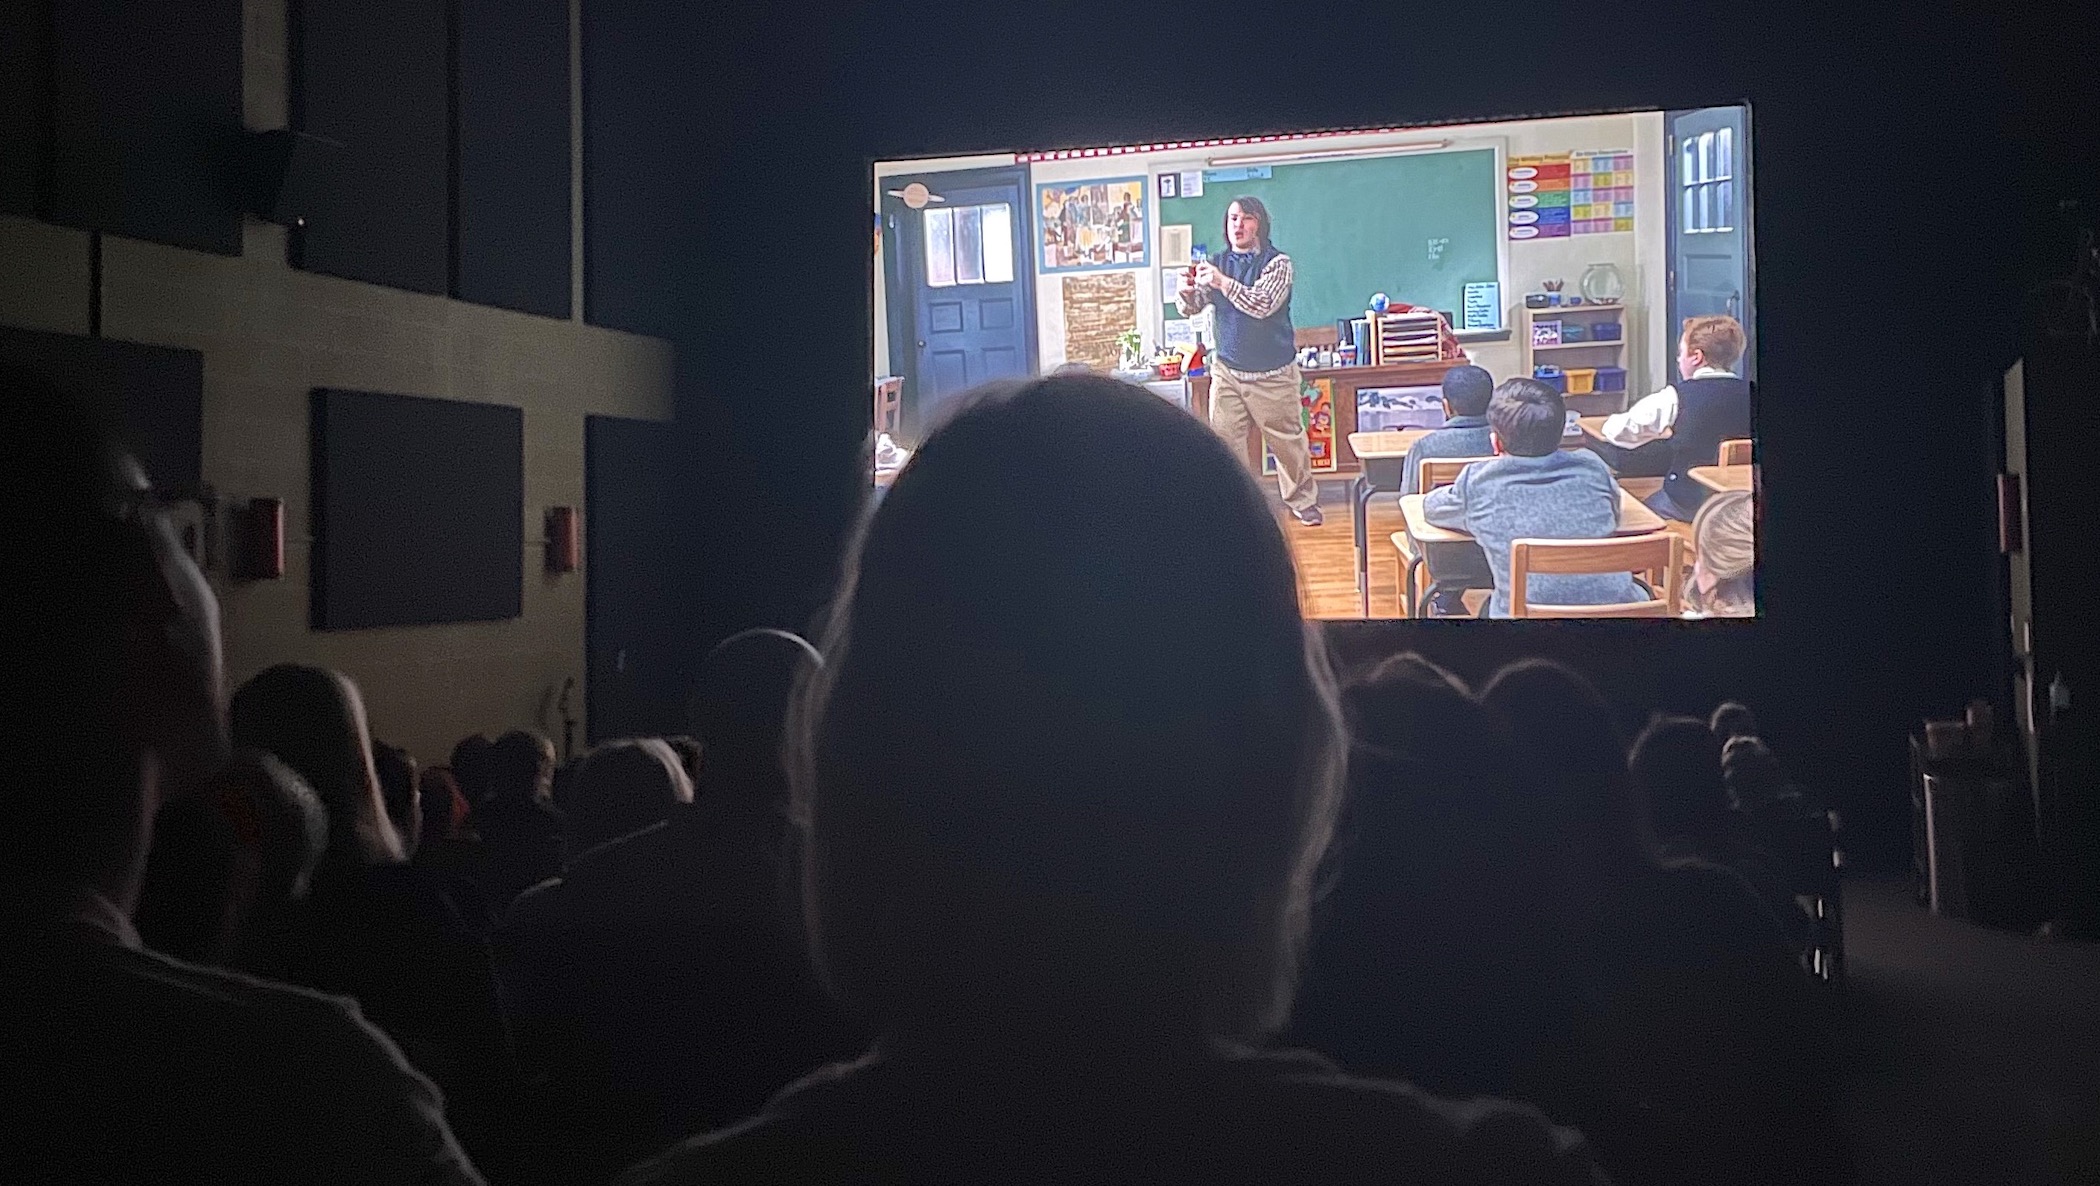 The film for August's Extra Credit film series was the 2003 comedy "School of Rock," starring Jack Black, who dances on screen while audience members watch the movie.